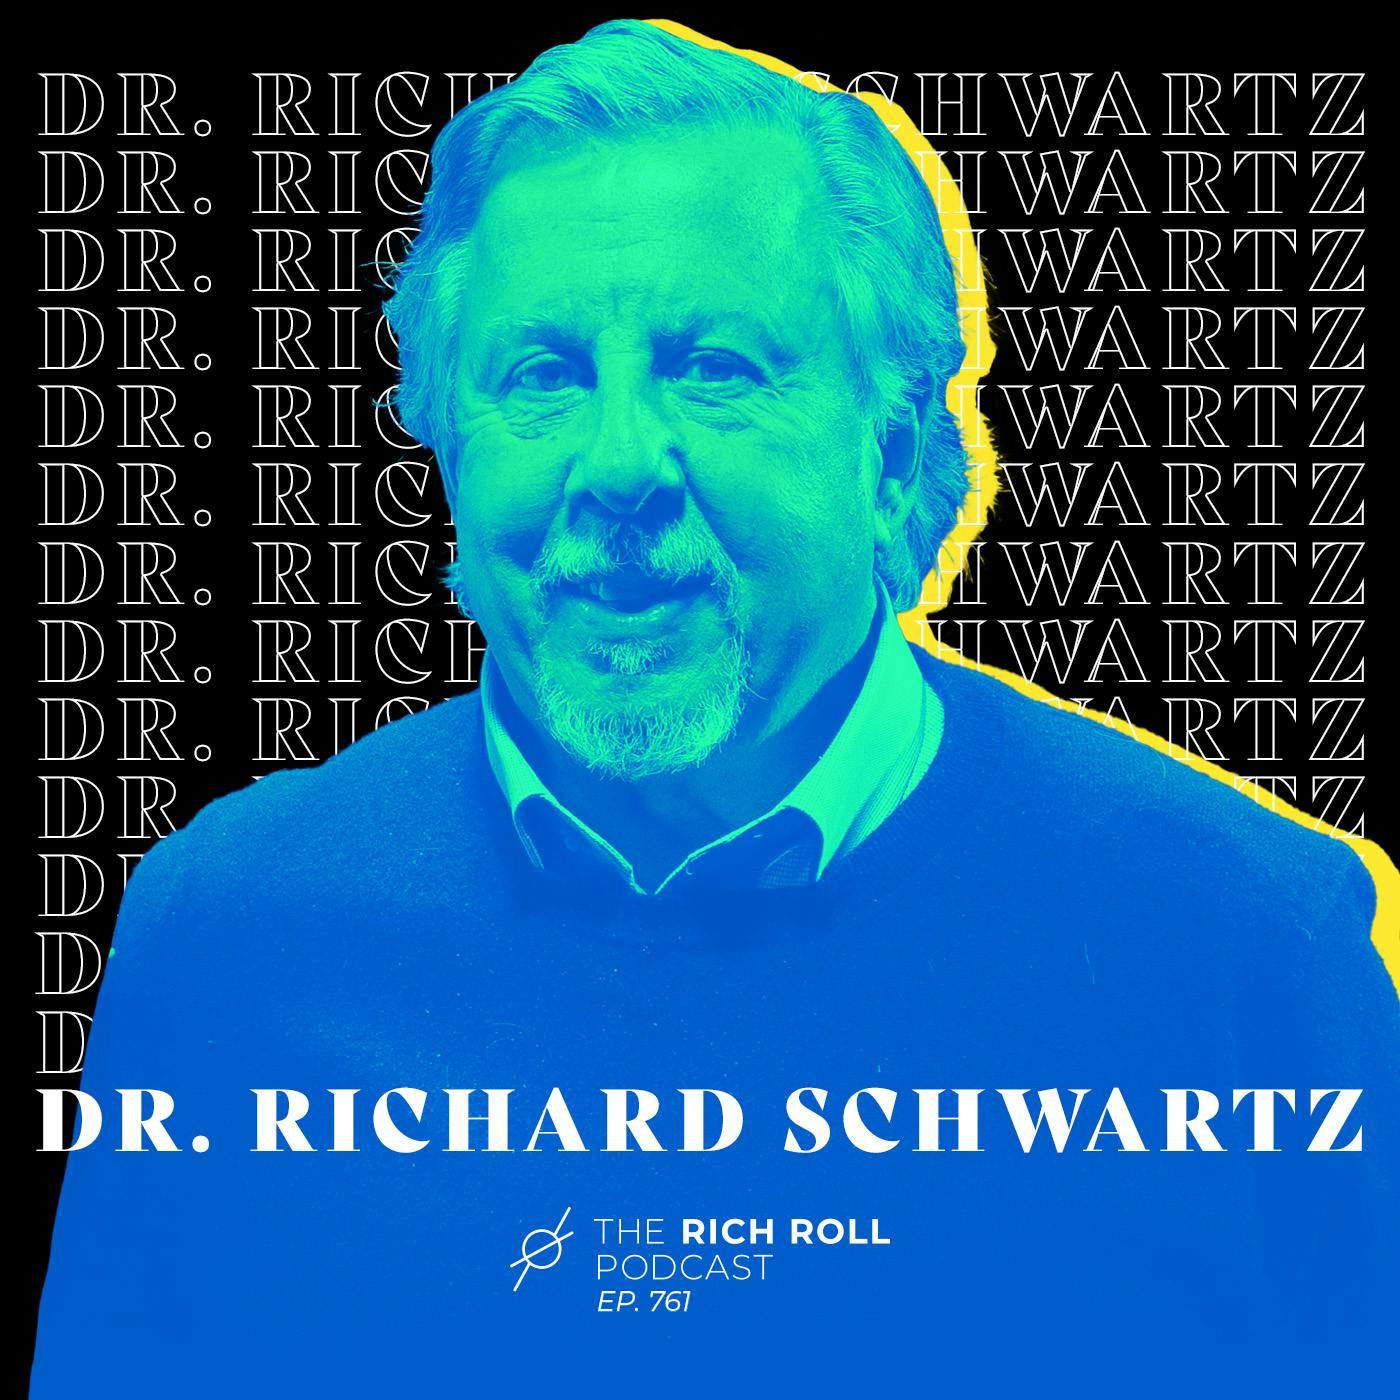 The Multiplicity of the Mind: Dr. Richard Schwartz On A Systems Approach to Healing the Self